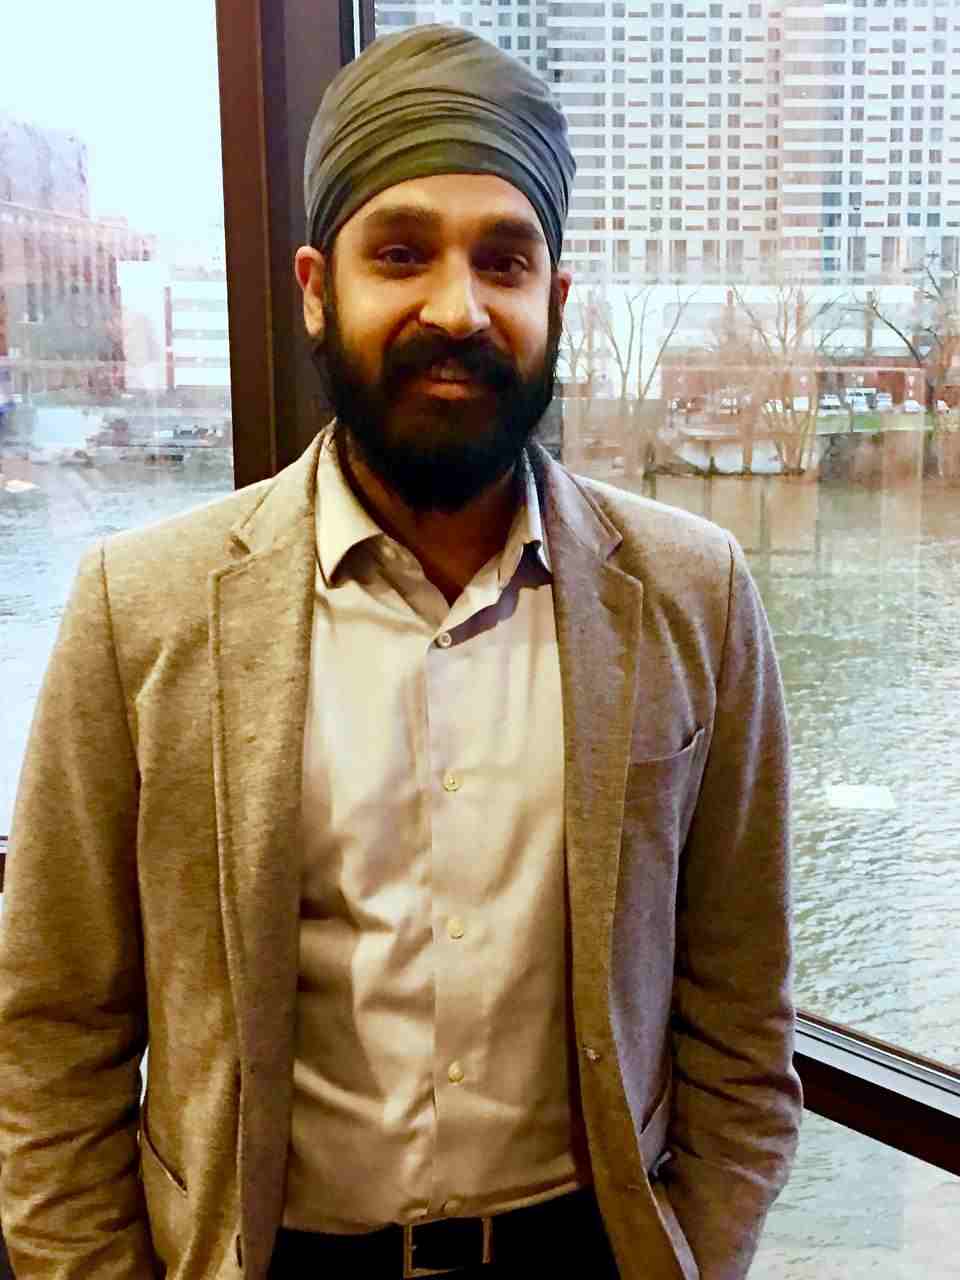 WGVU: "Apparent Muslim" a new at-risk group says Sikh leader